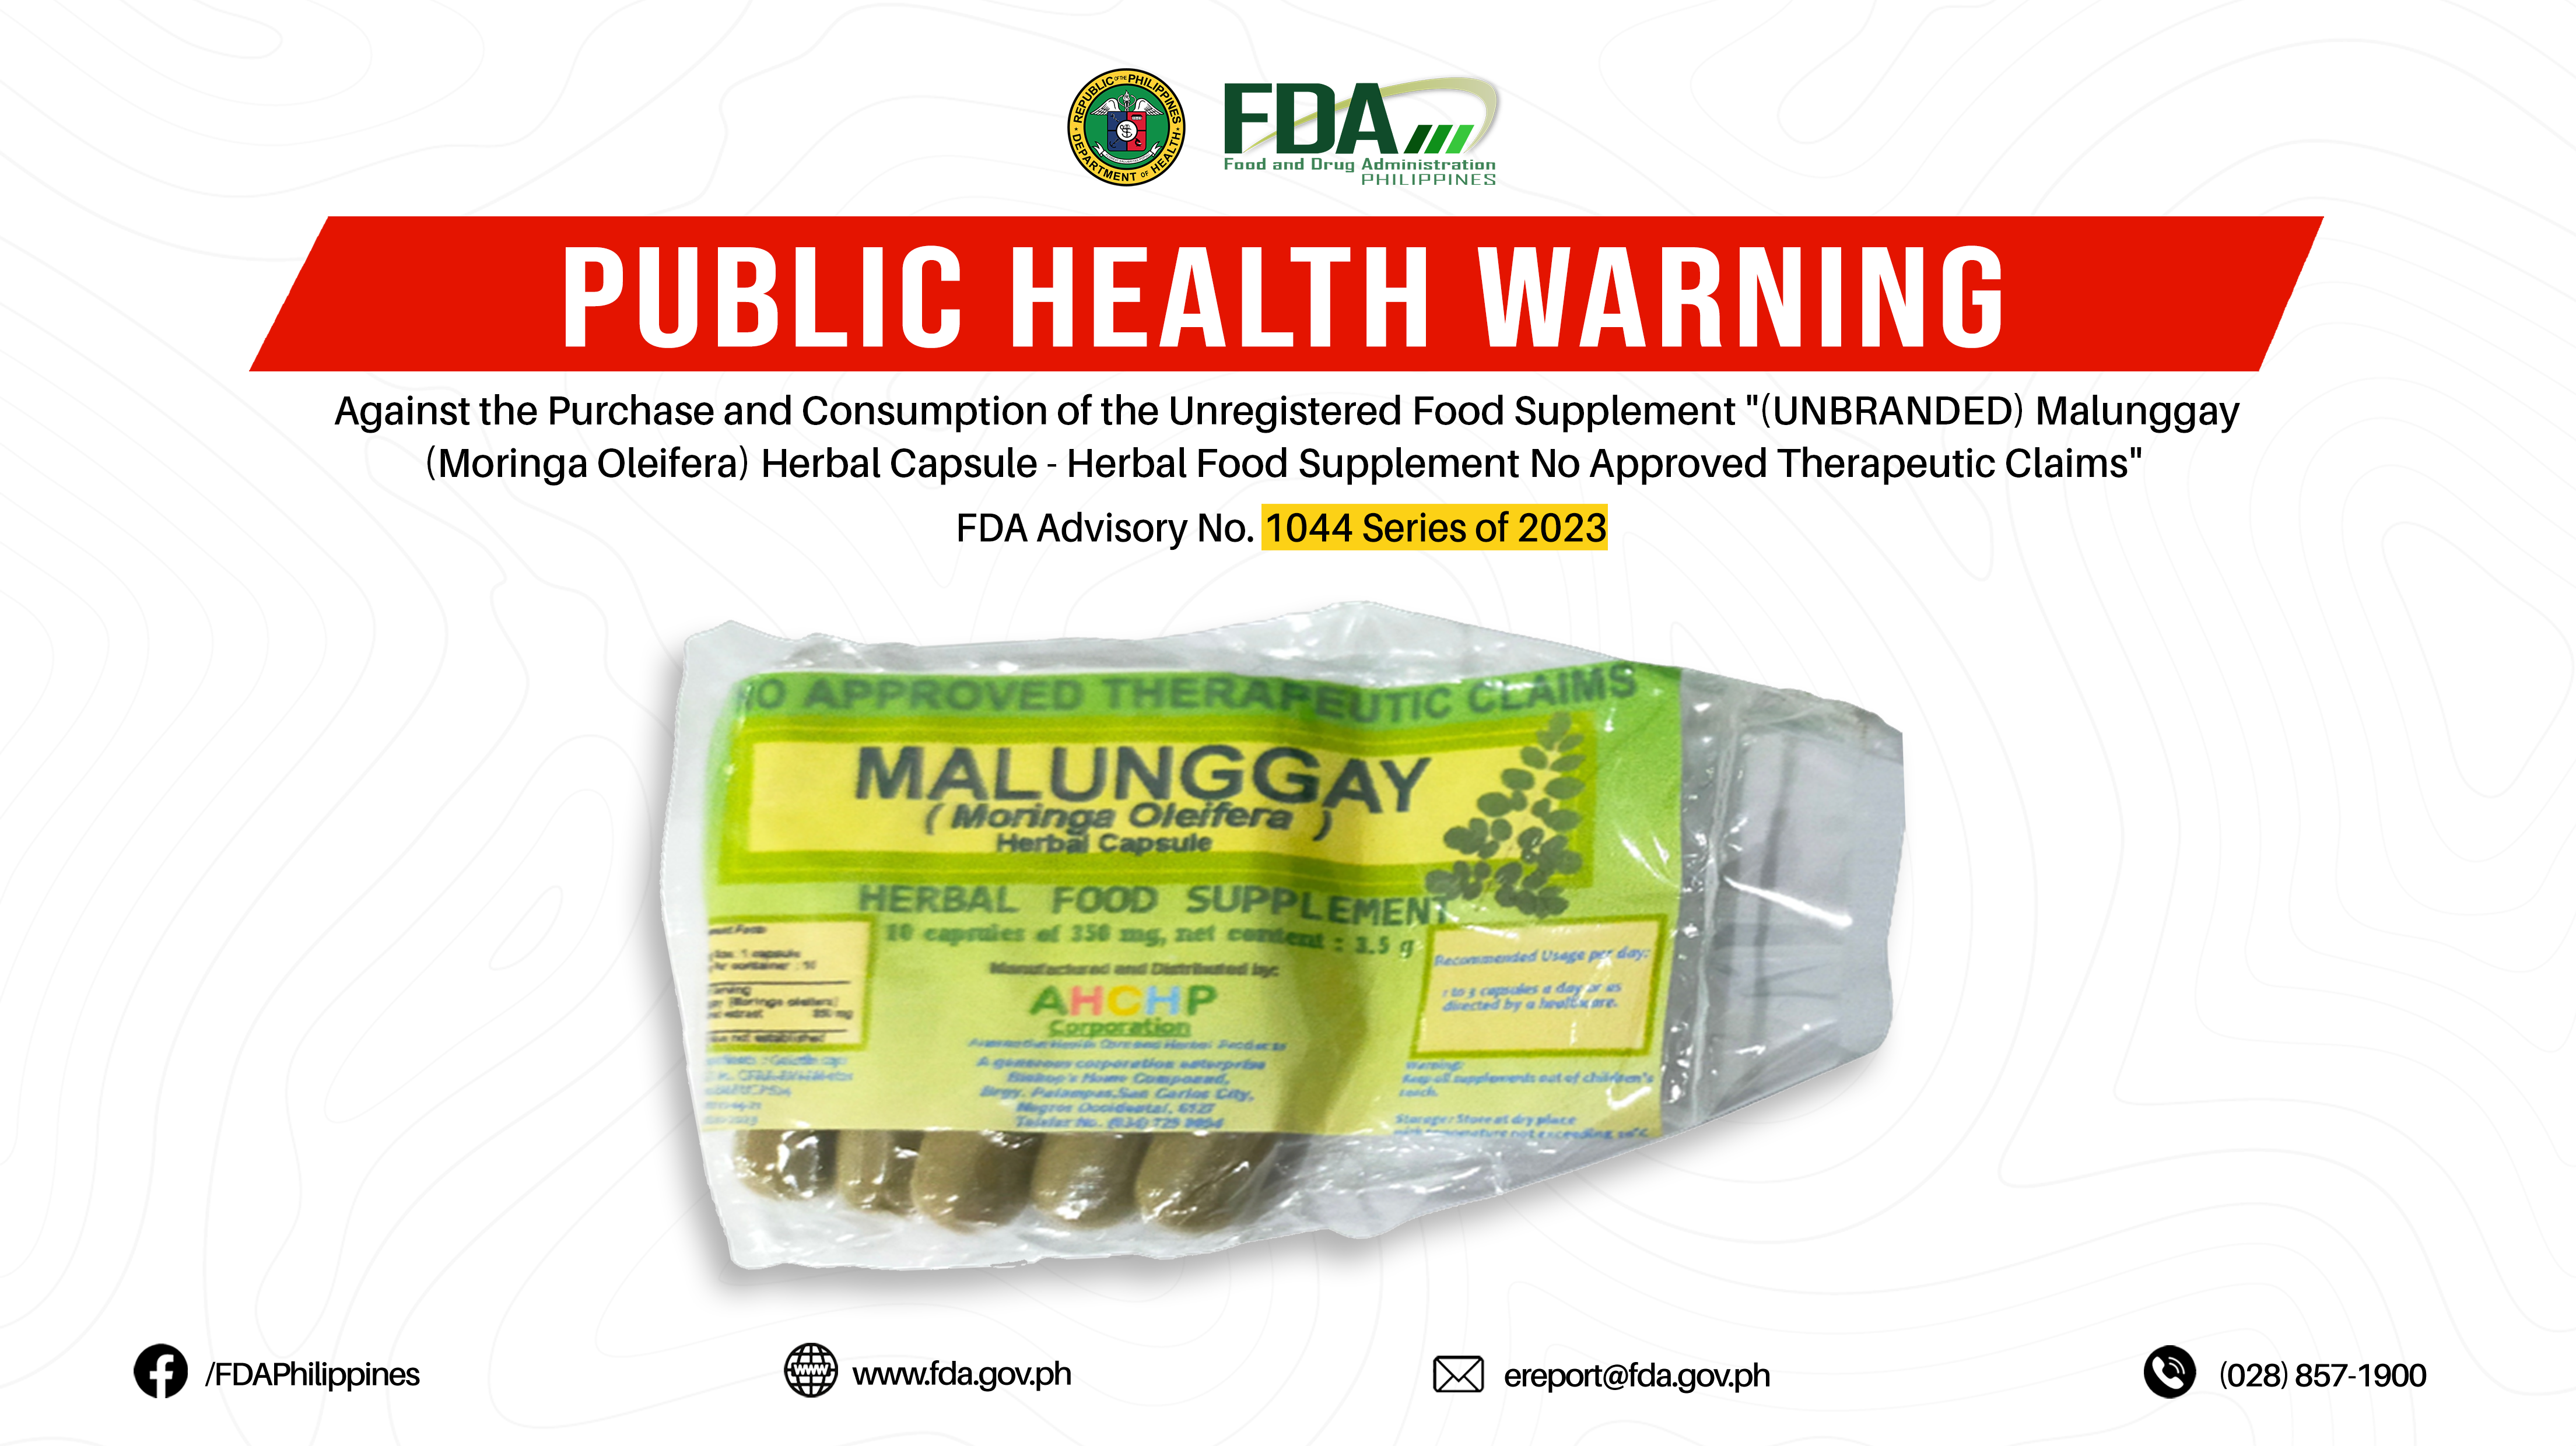 FDA Advisory No.2023-1044 || Public Health Warning Against the Purchase and Consumption of the Unregistered Food Supplement “(UNBRANDED) Malunggay (Moringa Oleifera) Herbal Capsule – Herbal Food Supplement No Approved Therapeutic Claims”